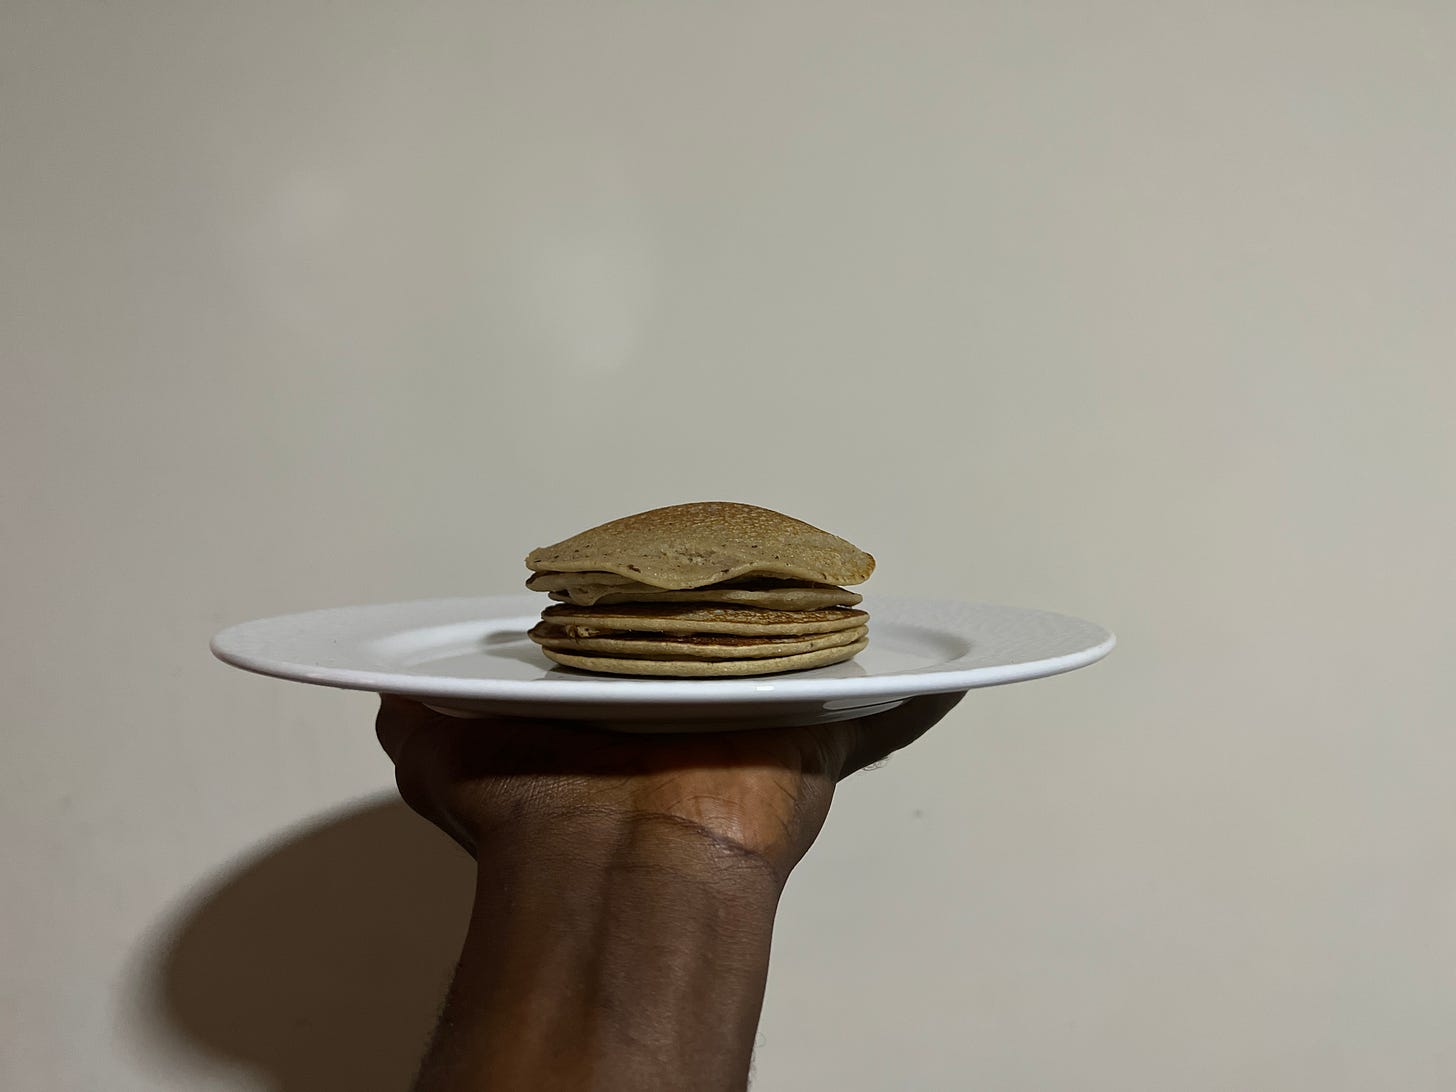 Banana-apple-sesame pancakes layered atop each other on a plate